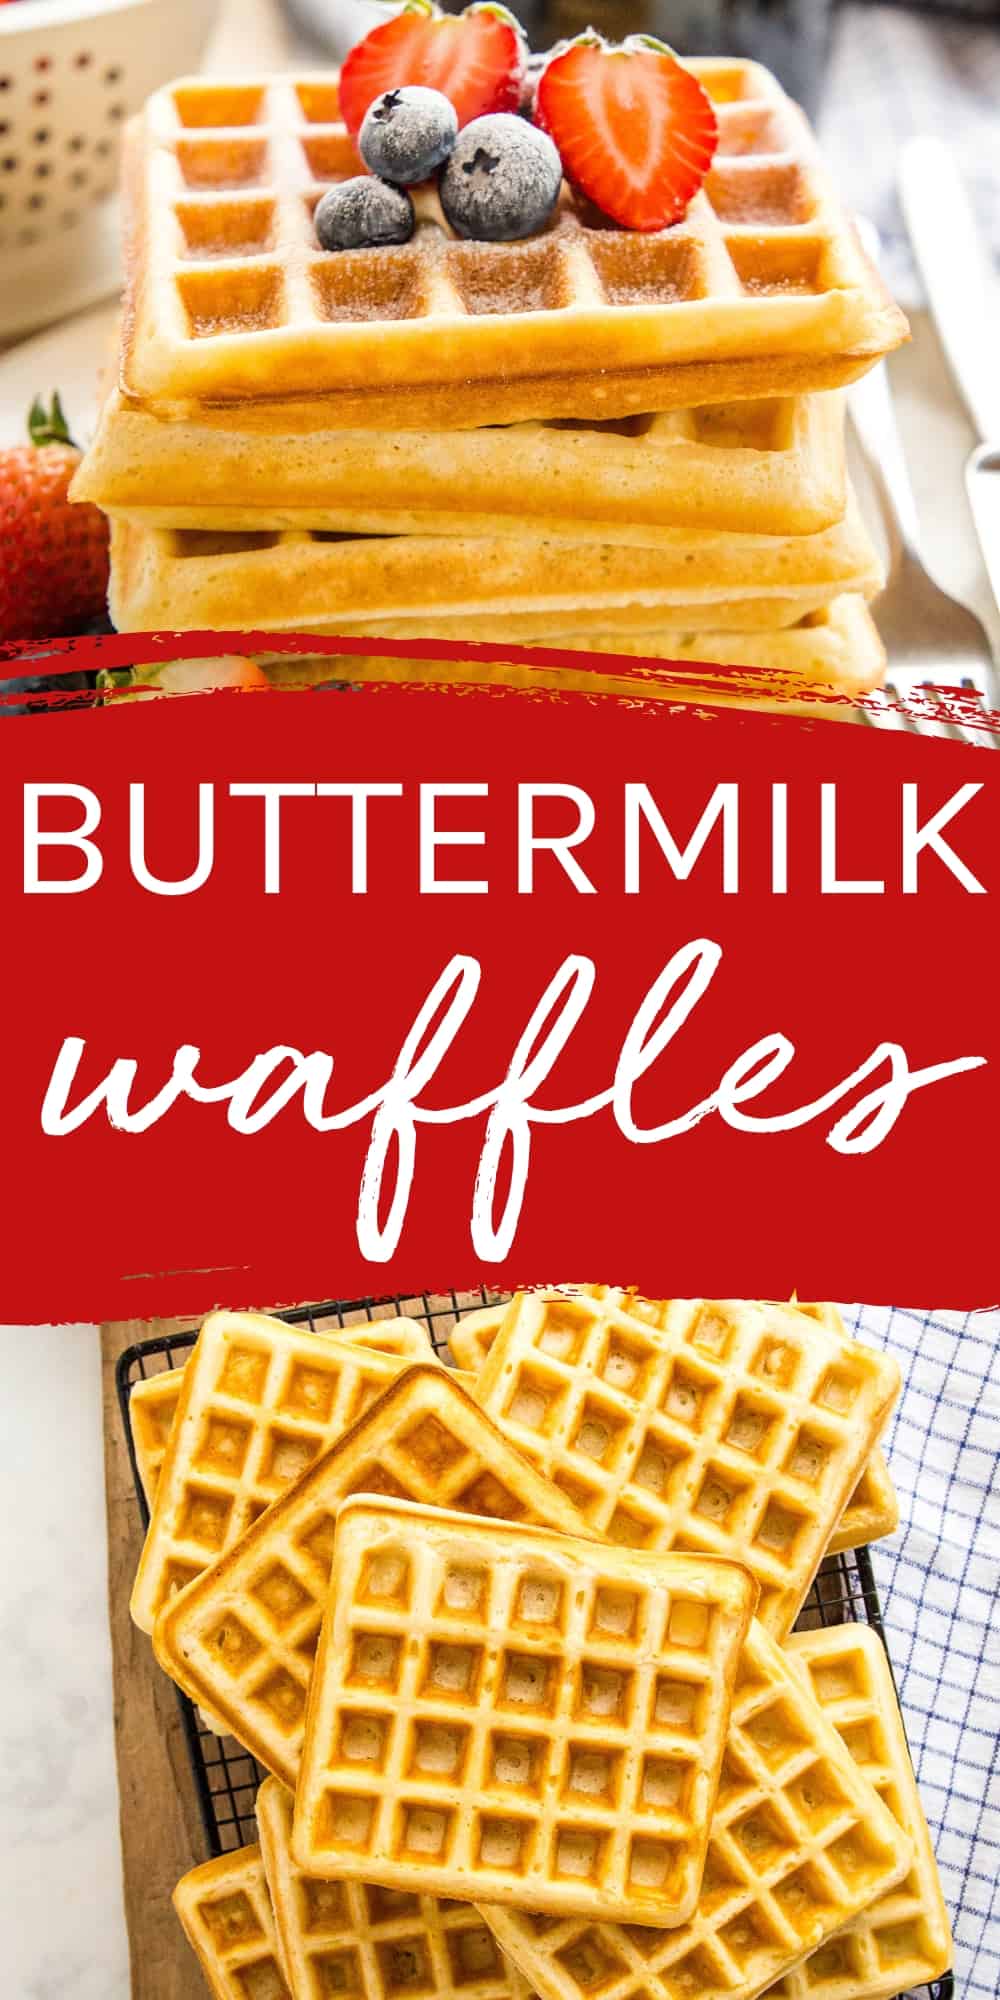 This Buttermilk Waffles Recipe makes the BEST light and fluffy waffles! Easy to make, perfect for breakfast or brunch, with a simple secret ingredient! Recipe from thebusybaker.ca! #waffles #wafflerecipe #buttermilkwaffles #buttermilkwafflerecipe #wafflesrecipe #breakfast #brunch #secretingredient #howtomakewaffles #easywaffles #easybreakfast #holidaybreakfast via @busybakerblog